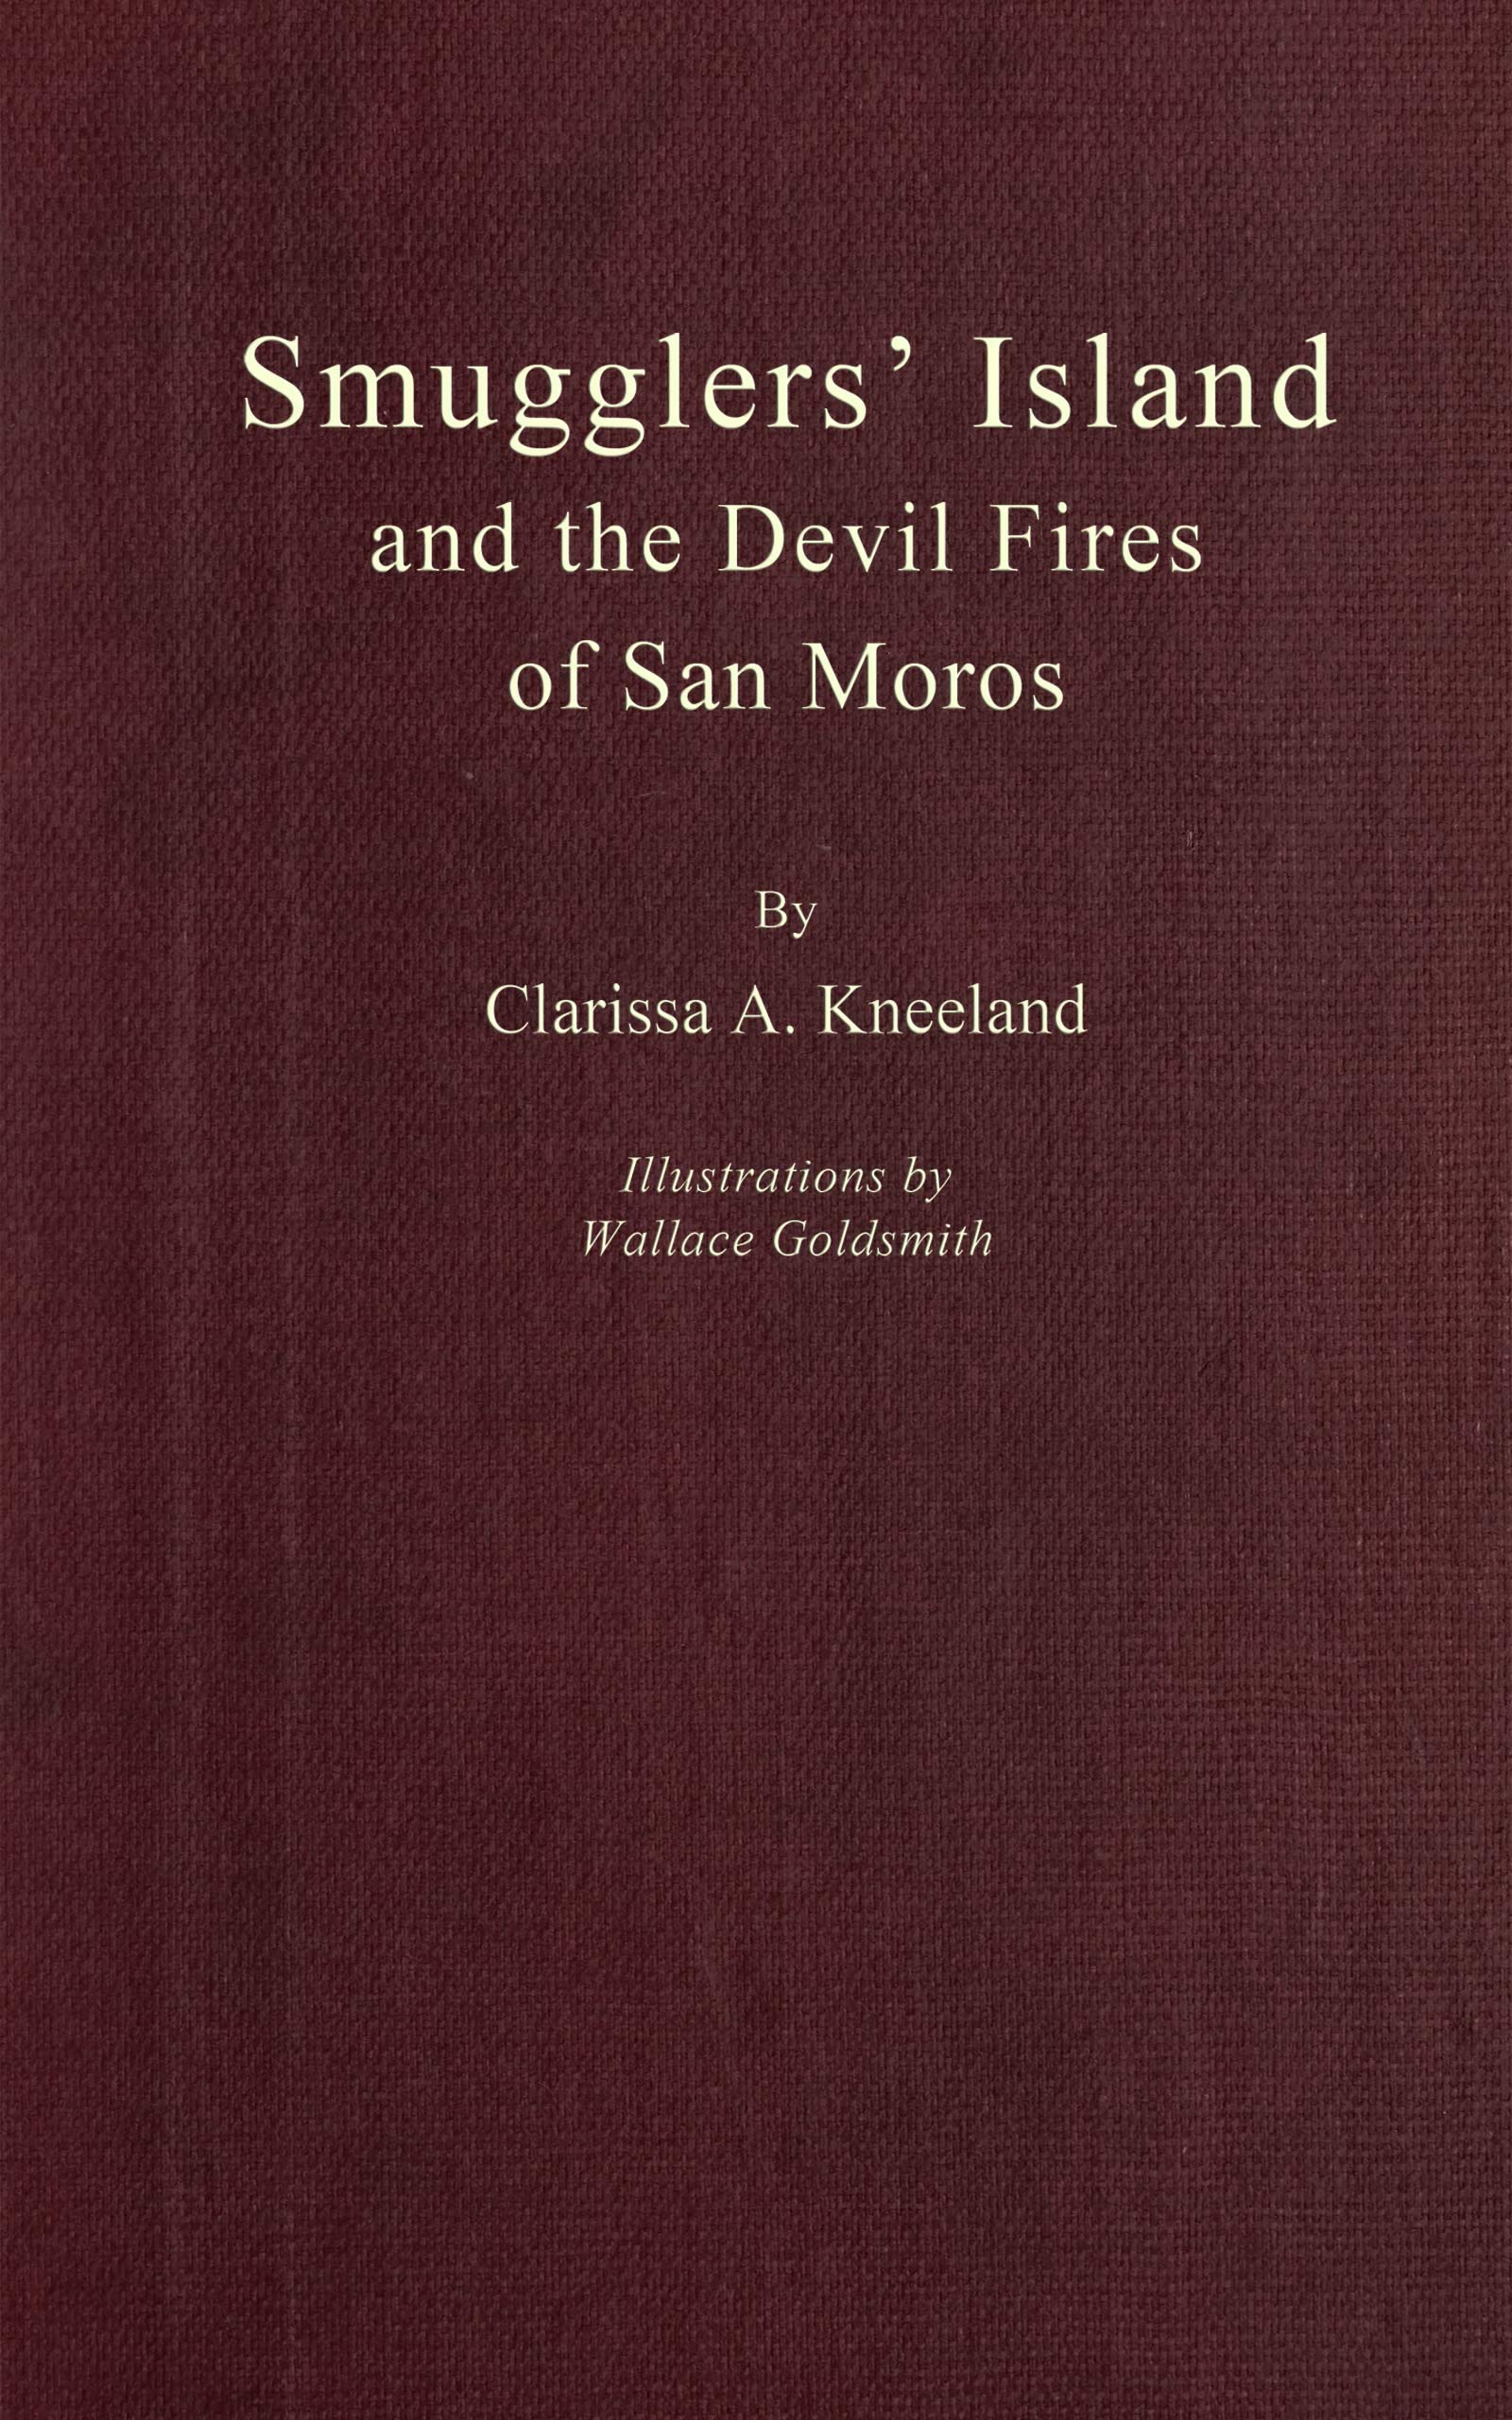 Smugglers' Island and the Devil Fires of San Moros, by Clarissa A